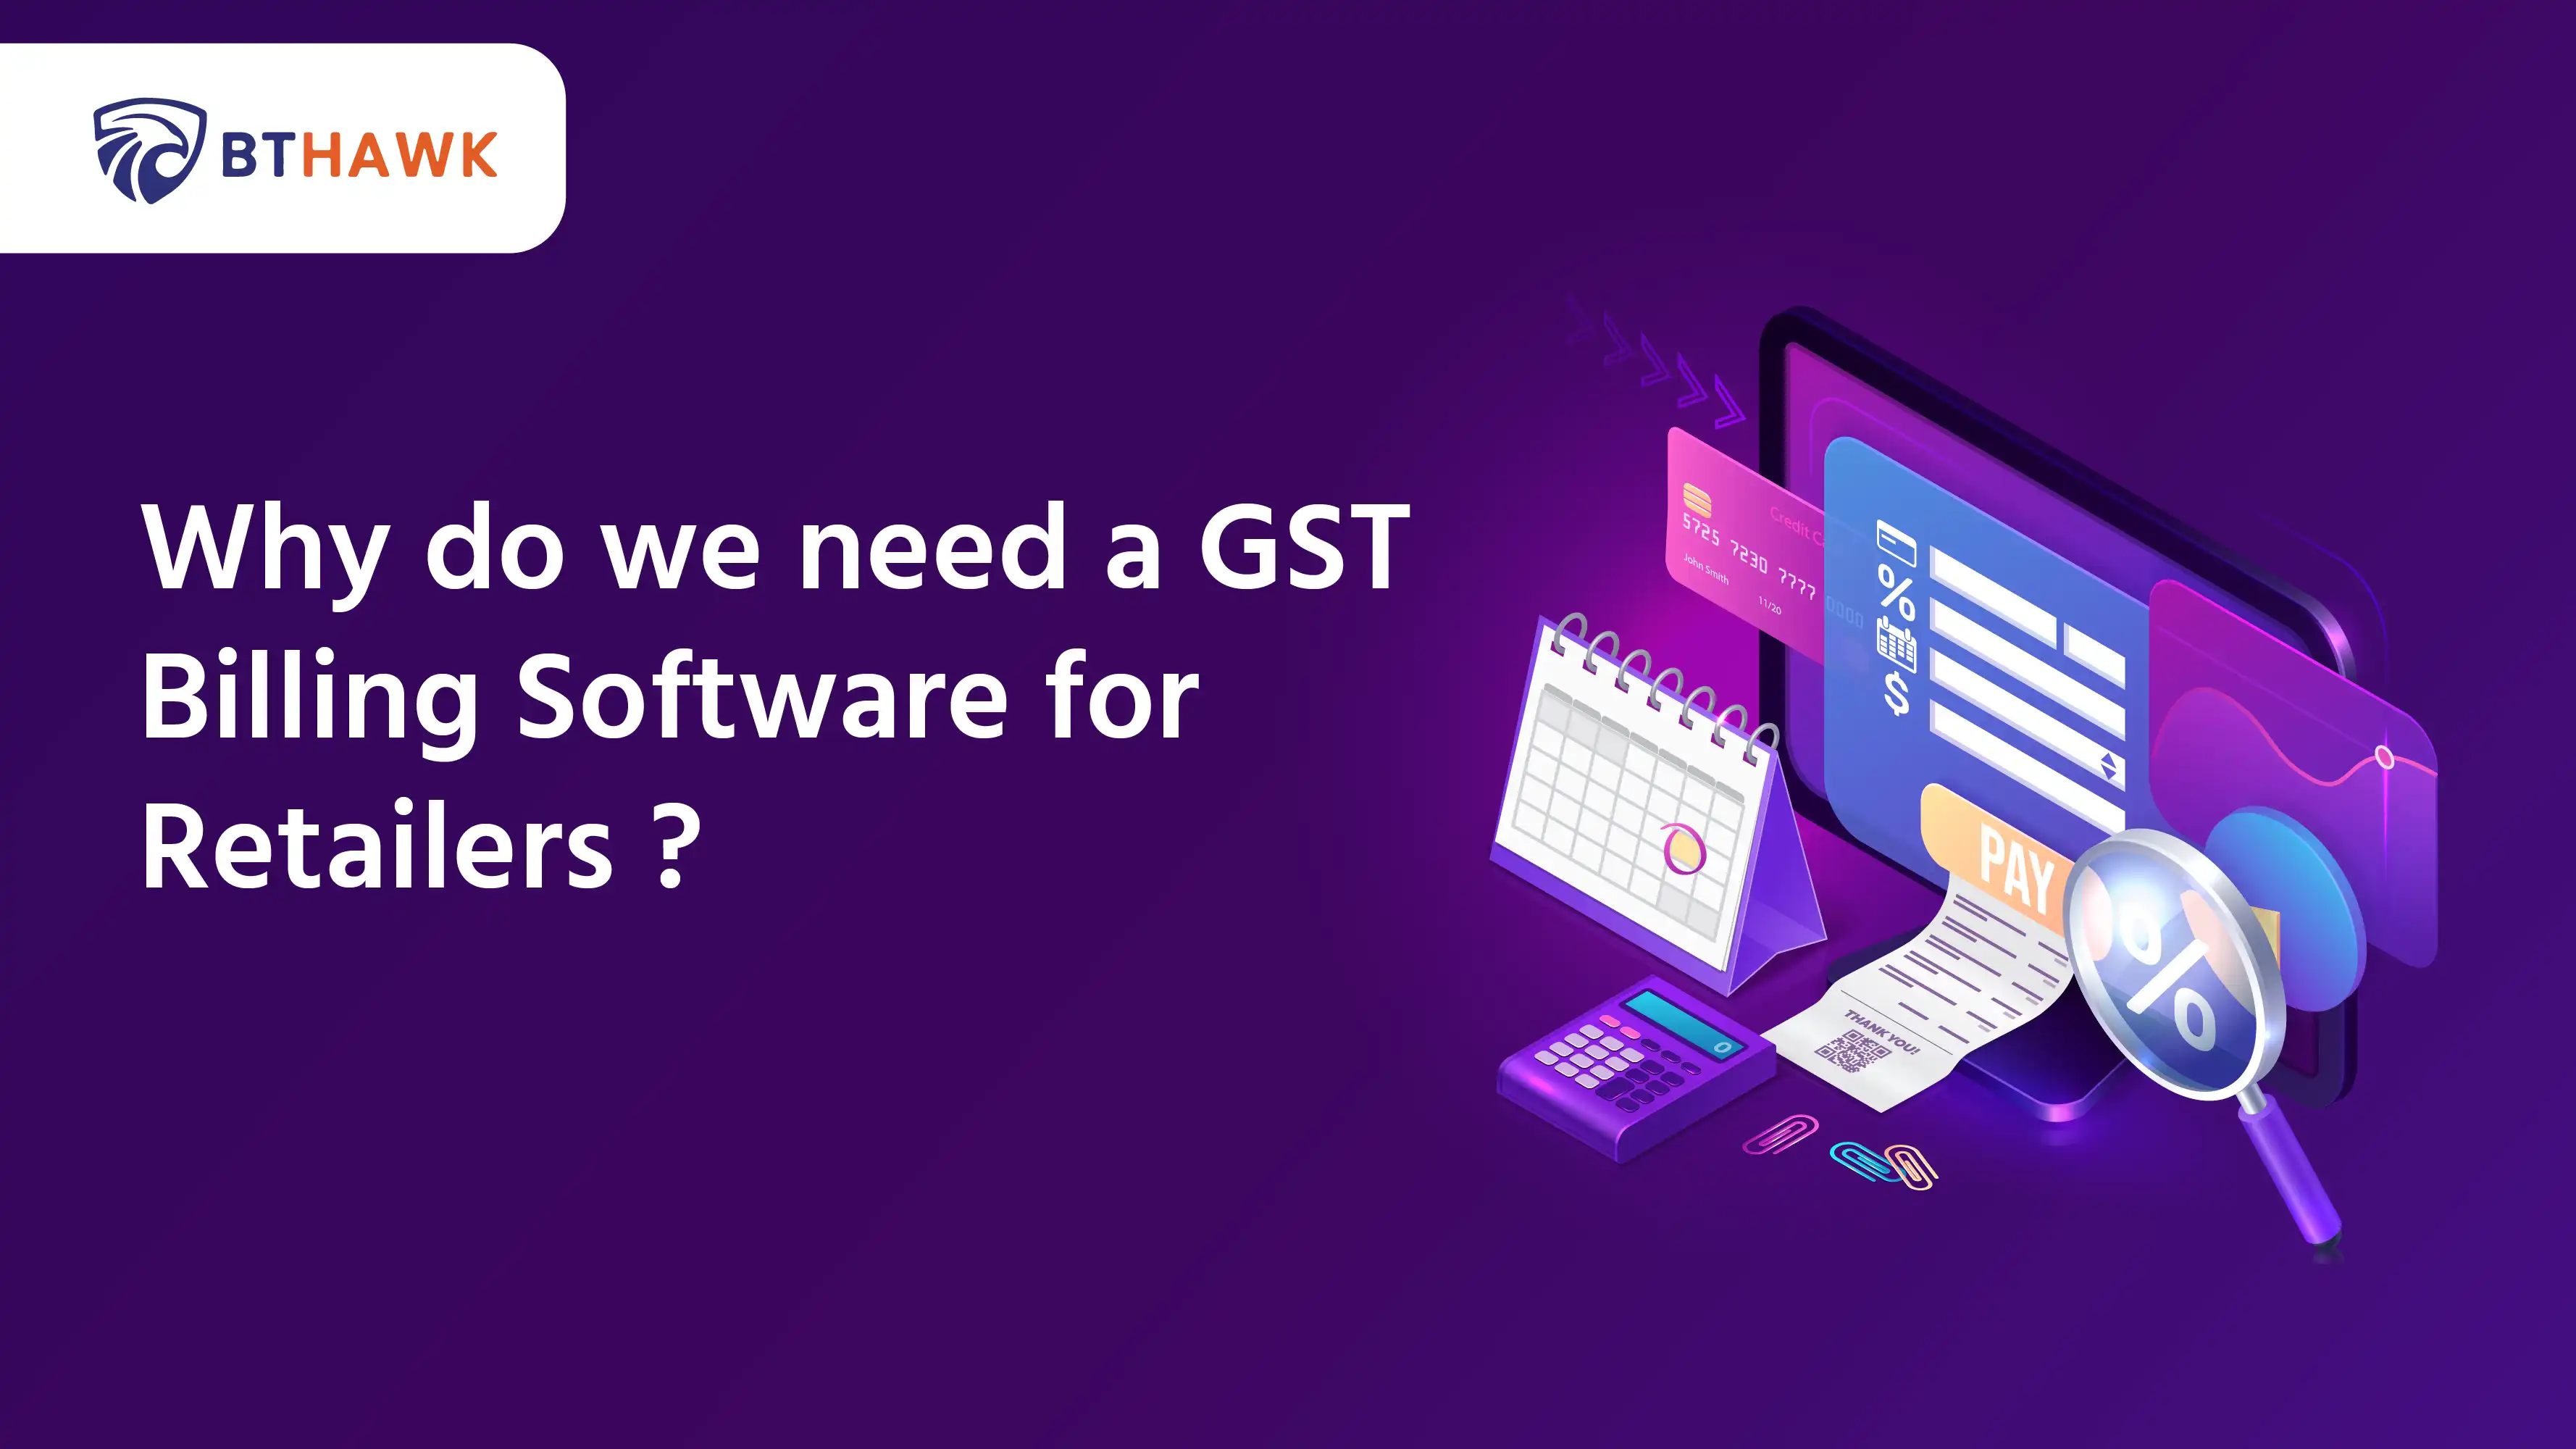    why-do-we-need-gst-billing-software-retailers-1718782389